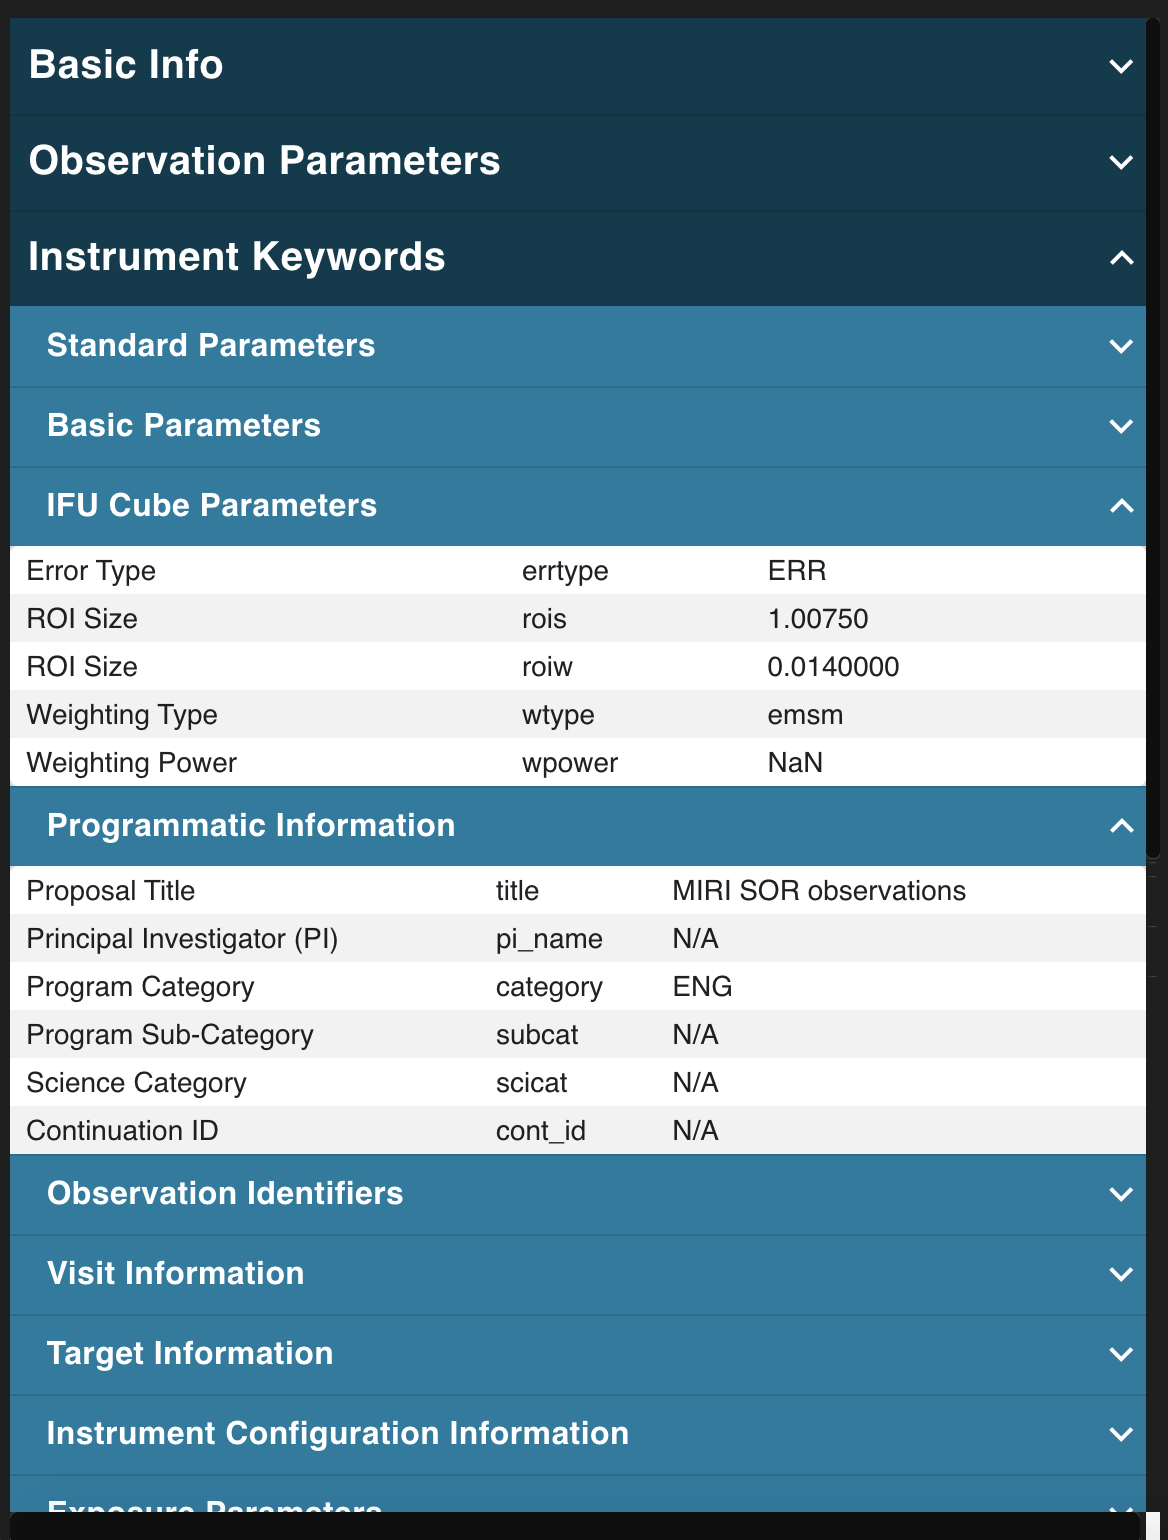 Instrument keywords group - showing the standard, basic, and IFC Parameter sub-panels, along with the Programmatic, Visit, and Target information sub-panels. The sub-panels are cut off at the bottom of the image due to their number